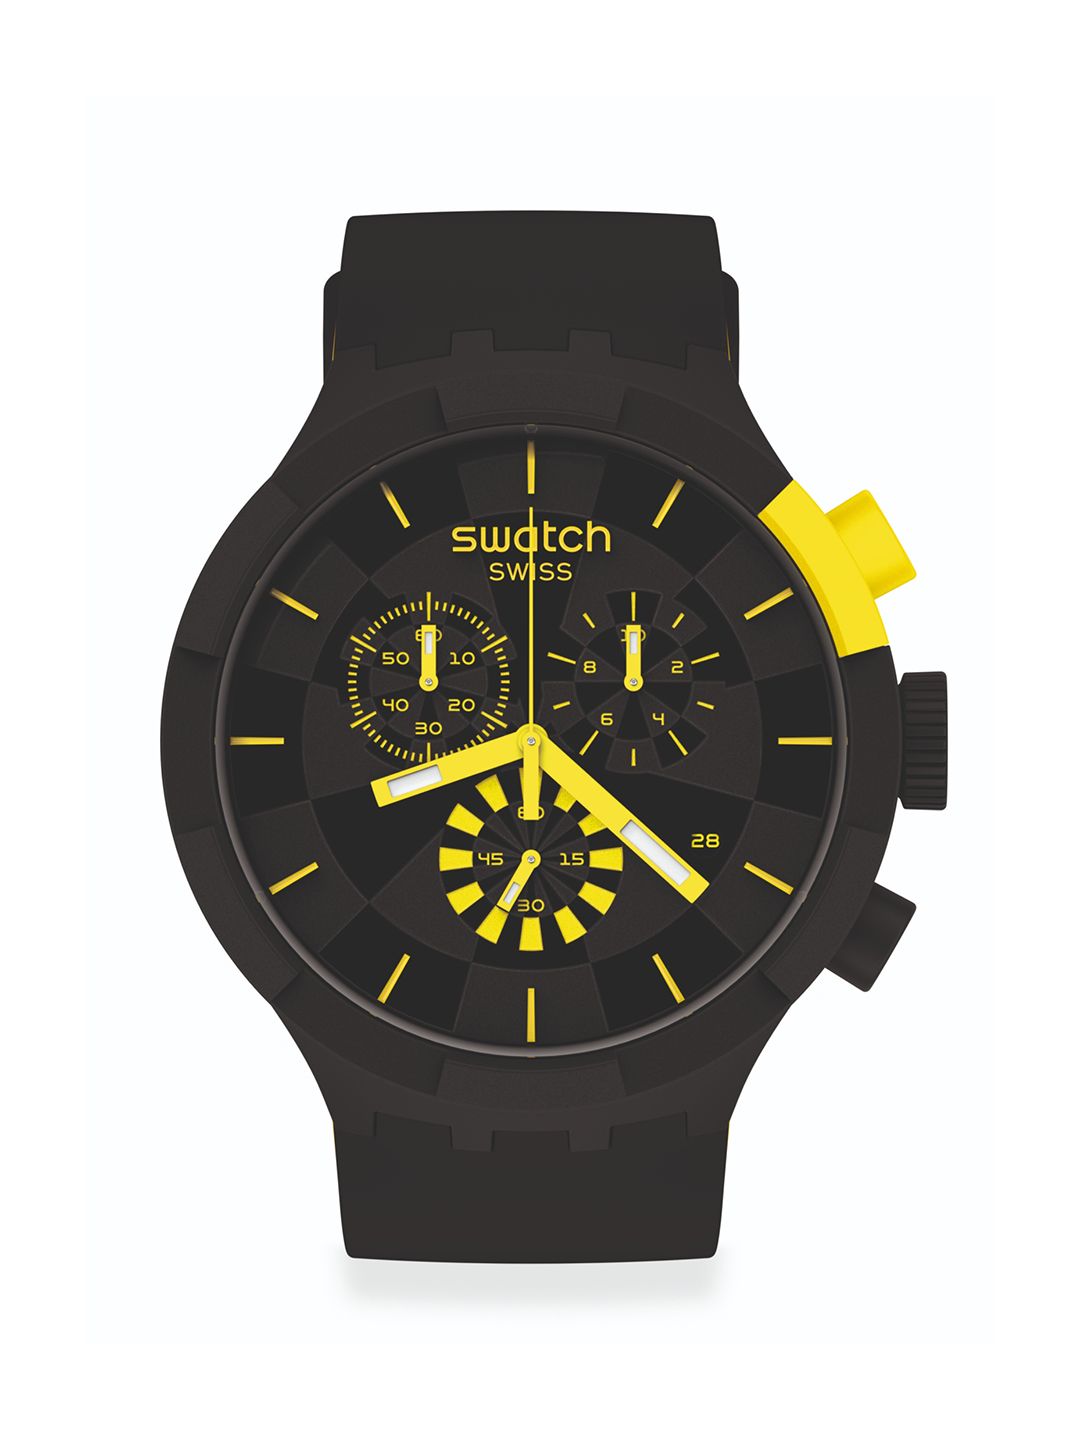 Swatch Unisex Black Analogue Swiss Made Water Resistant Watch SB02B403 Price in India